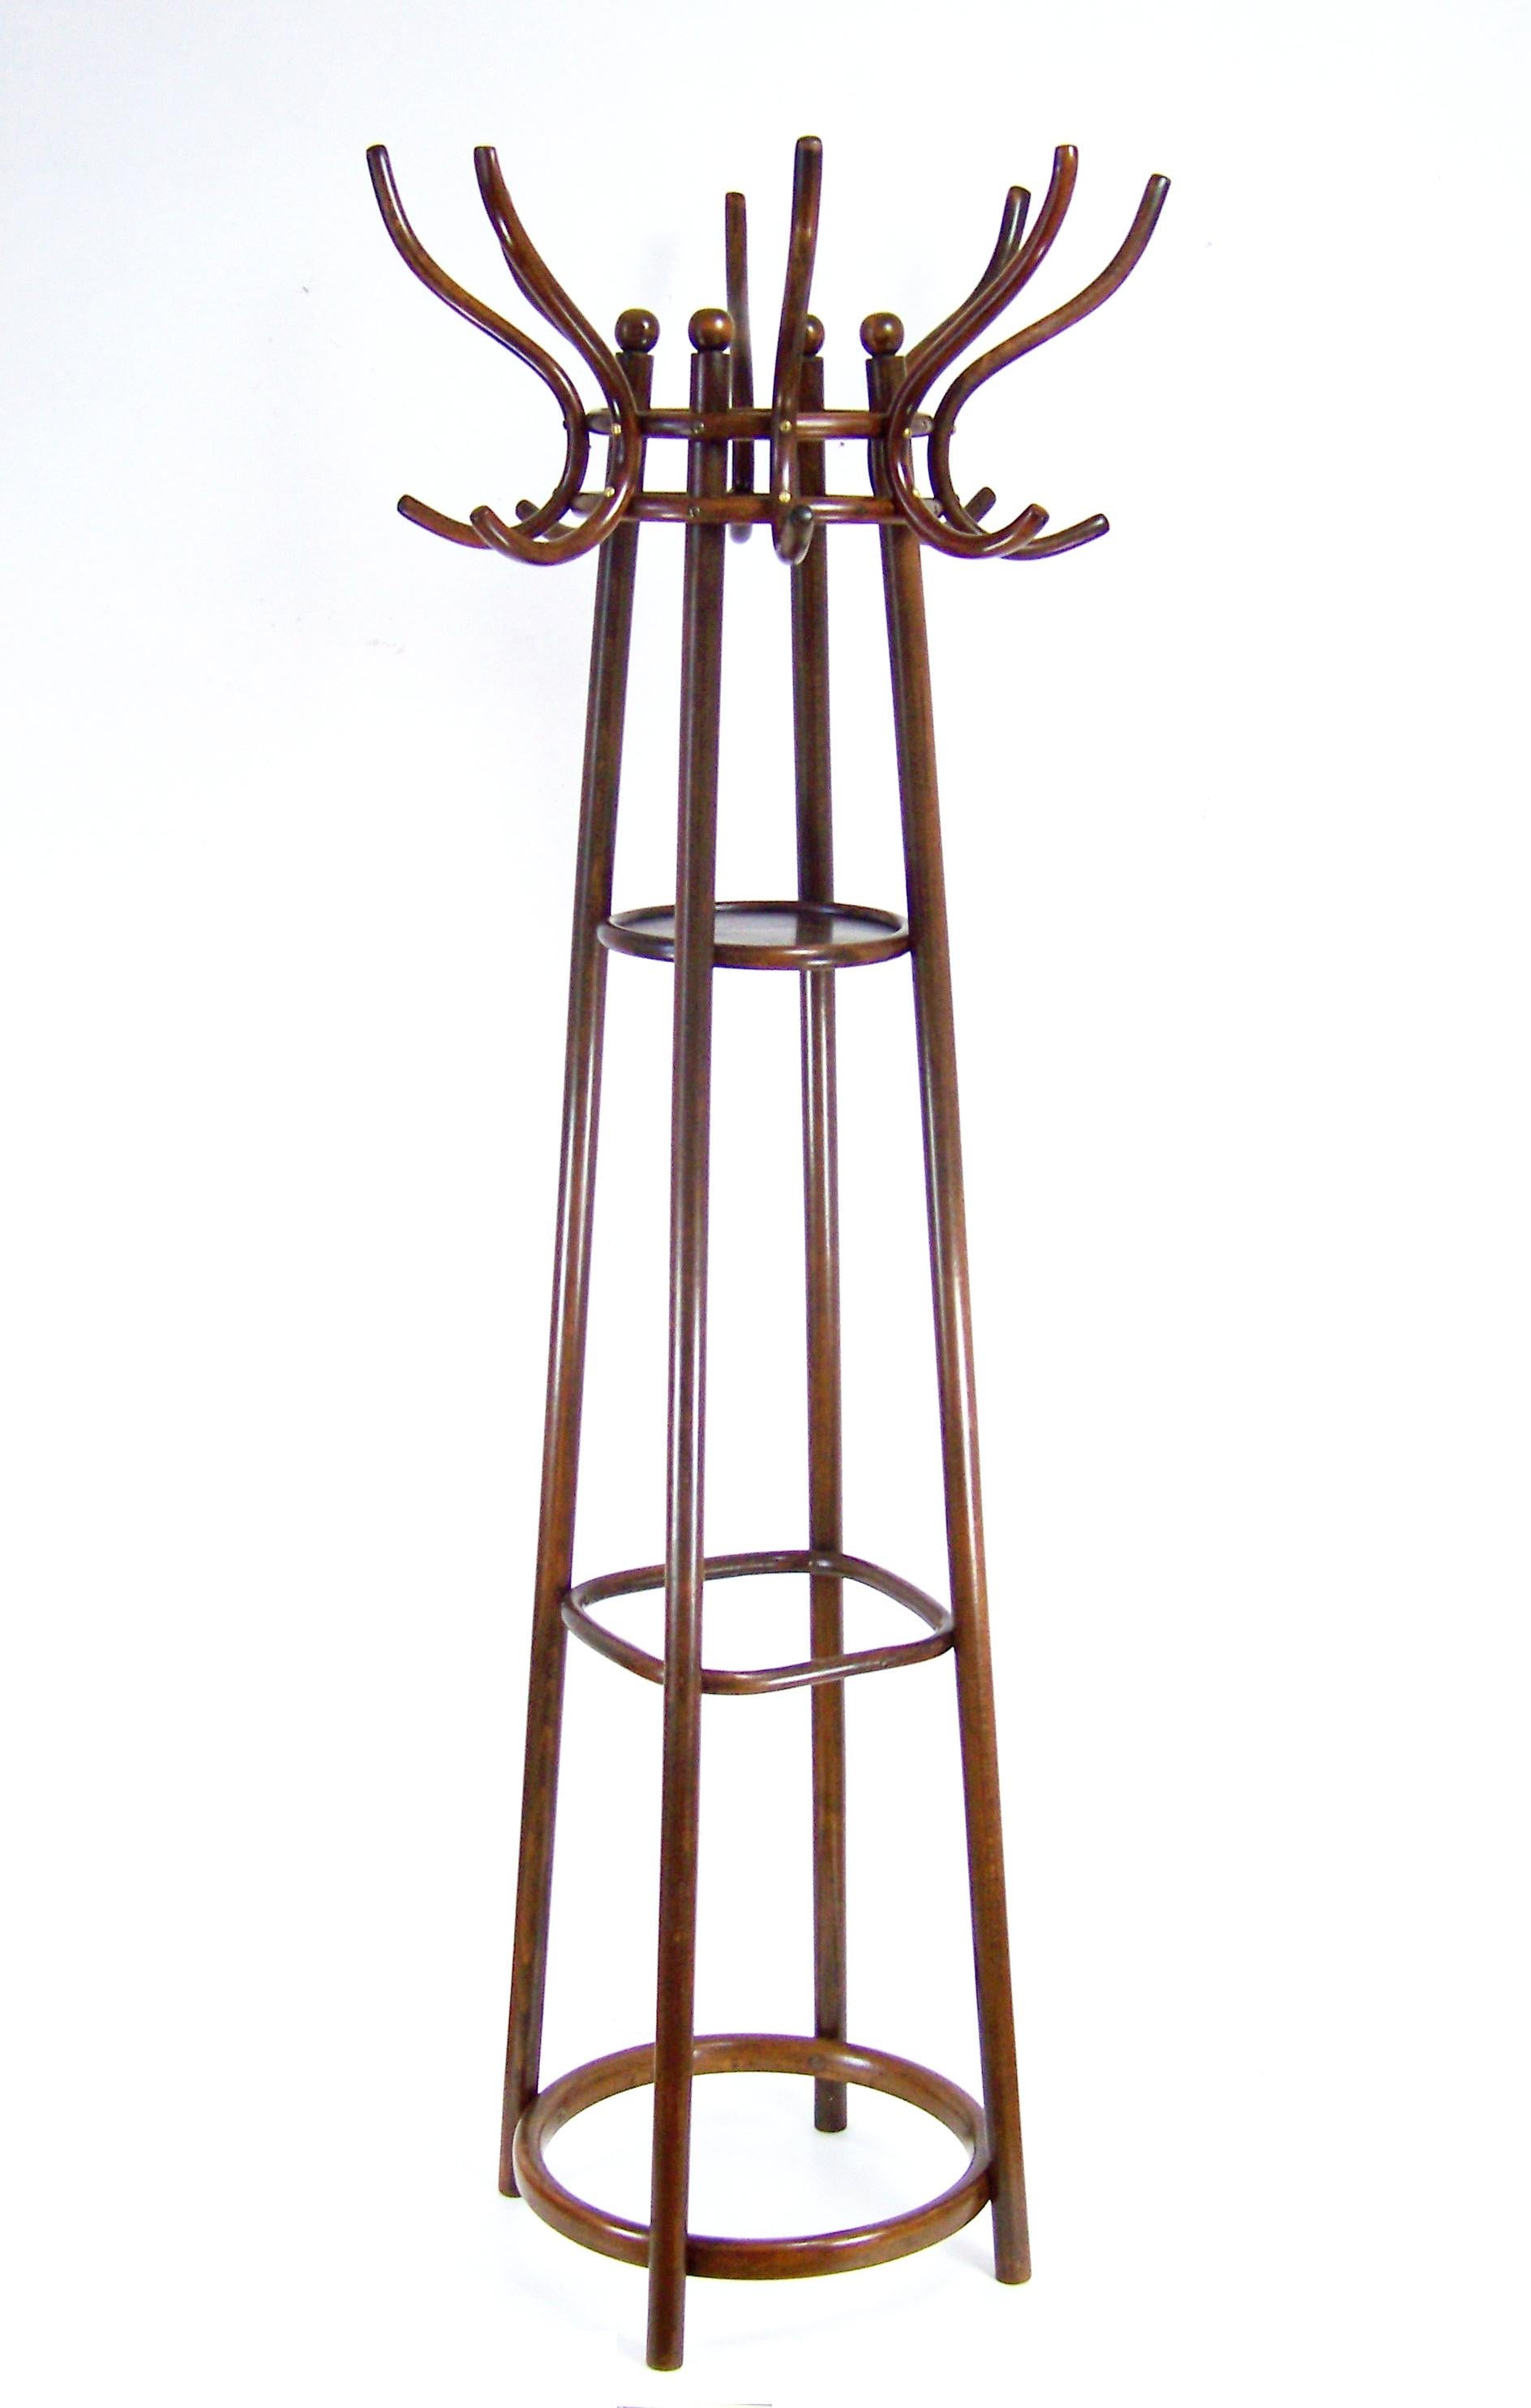 Manufactured in Austria by D.G.Fischel Company, circa 1910. Fischel was once of biggest Thonet's competitor. Coat rack was cleaned and gentle re-polished with shellack finish. Marked with paper label.